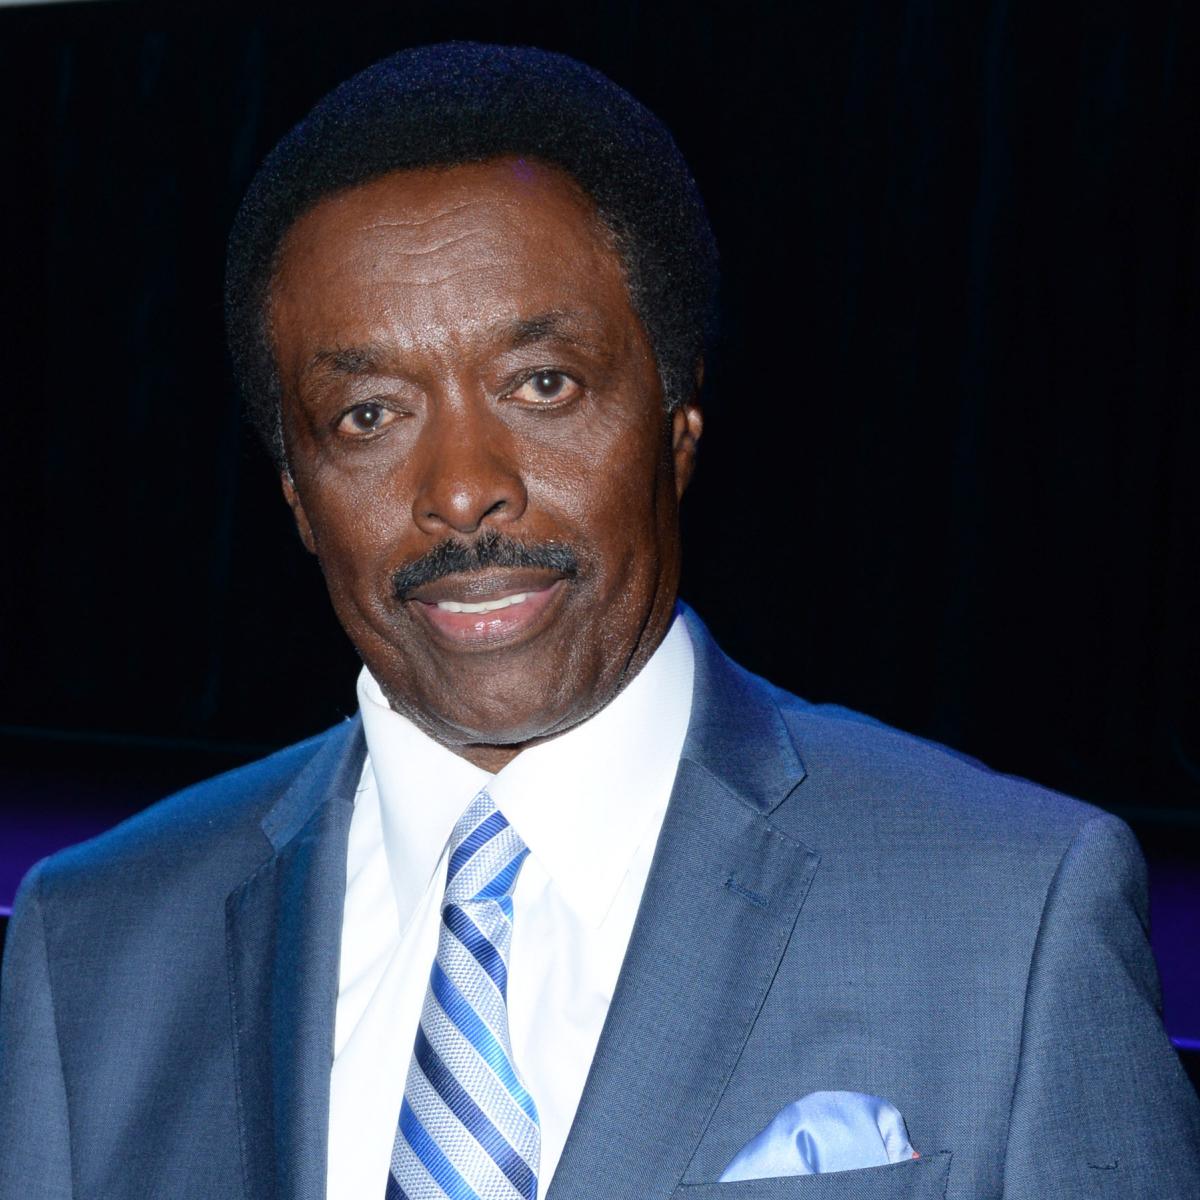 Broadcaster, Ex-NFL Player Jim Hill Accused of Domestic Violence by Lori  Lee | Bleacher Report | Latest News, Videos and Highlights